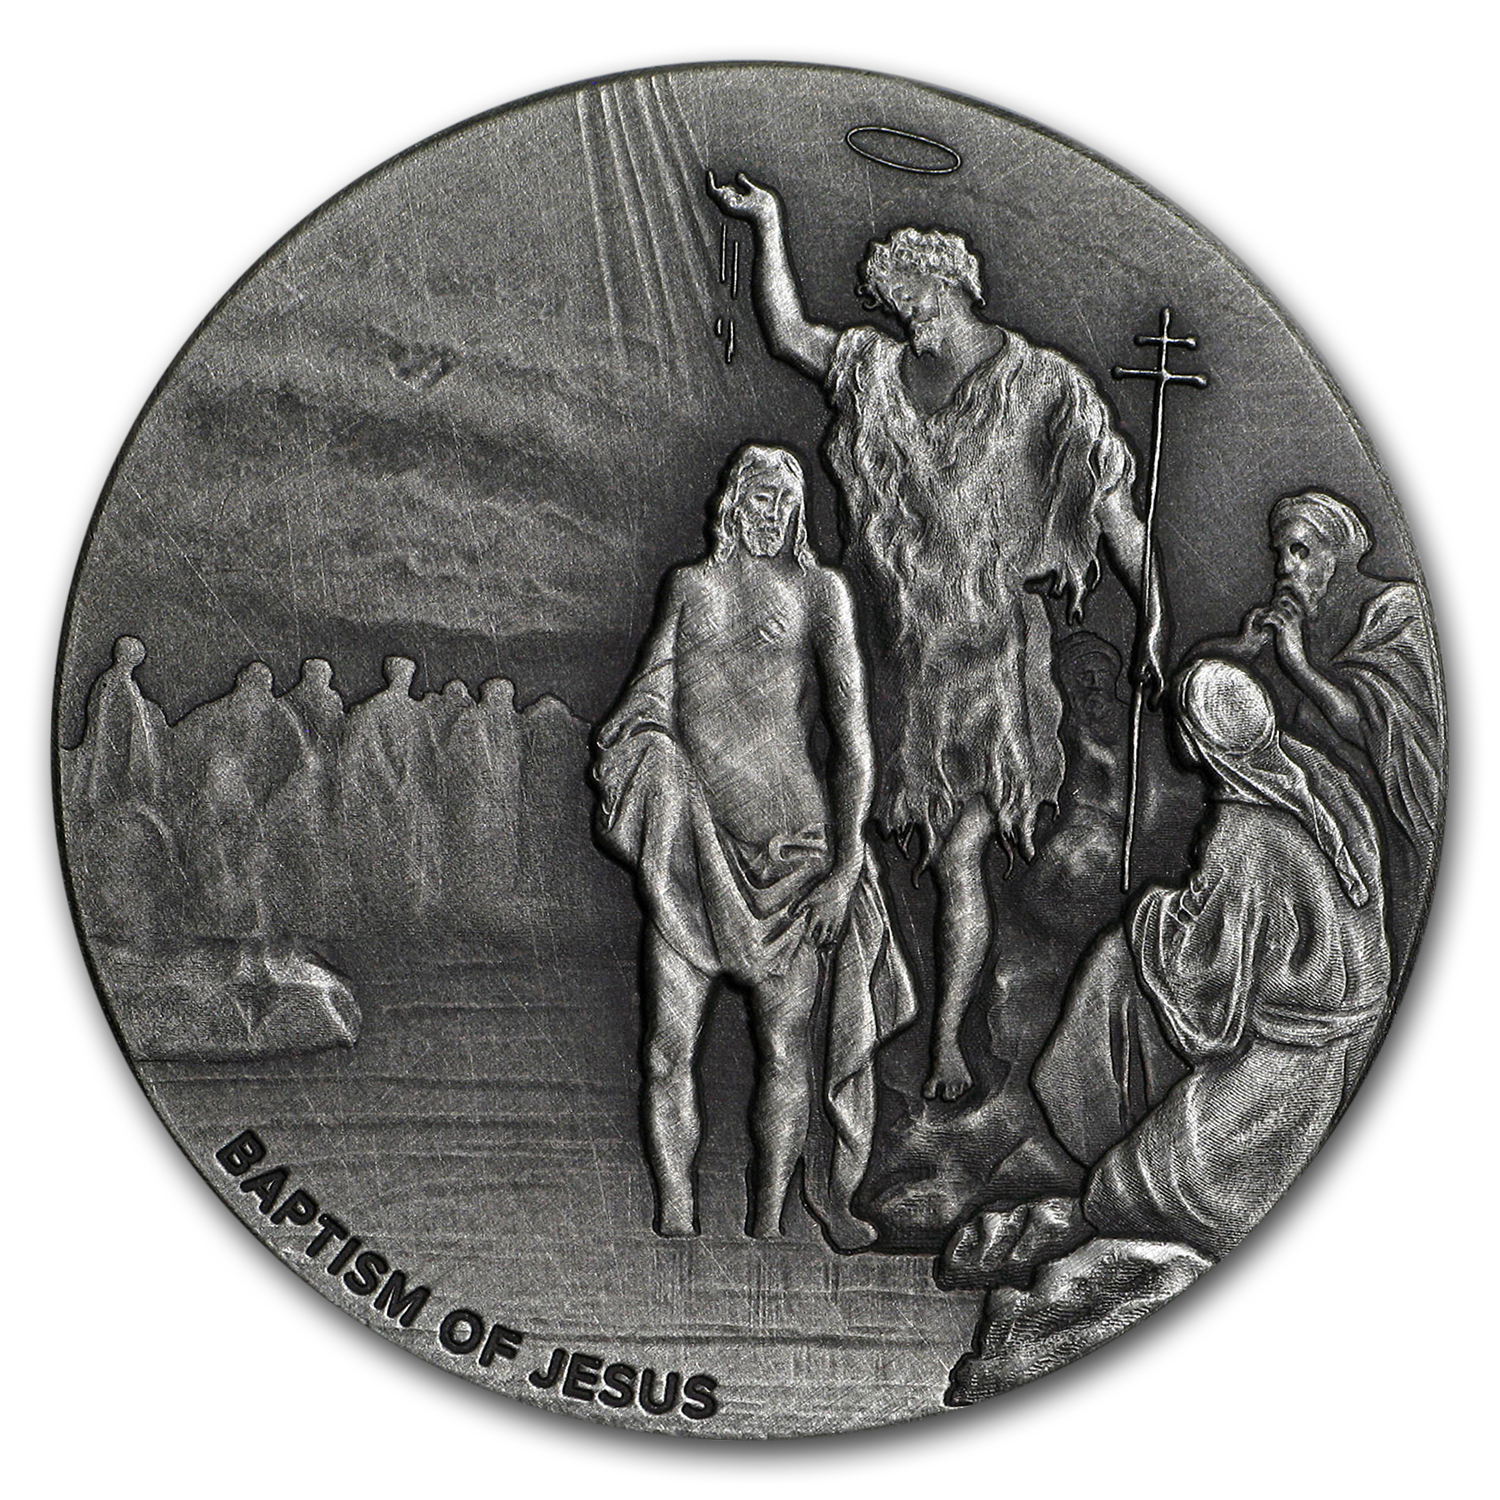 Buy 2017 2 oz Silver Coin - Biblical Series (The Baptism of Jesus)